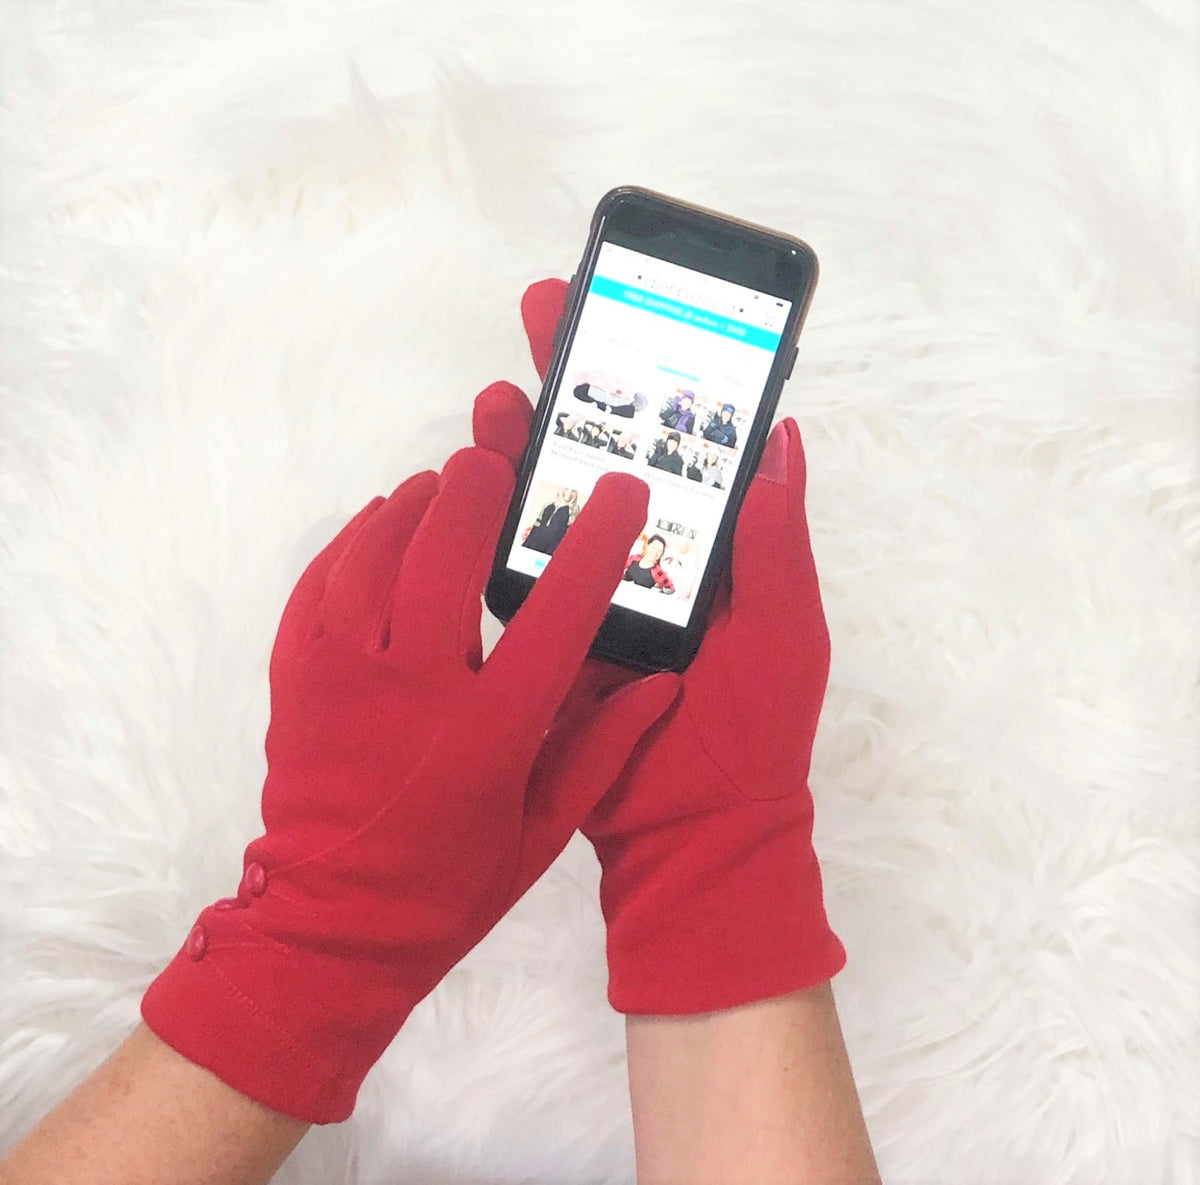 gloves, winter, cold, technology, touch screen